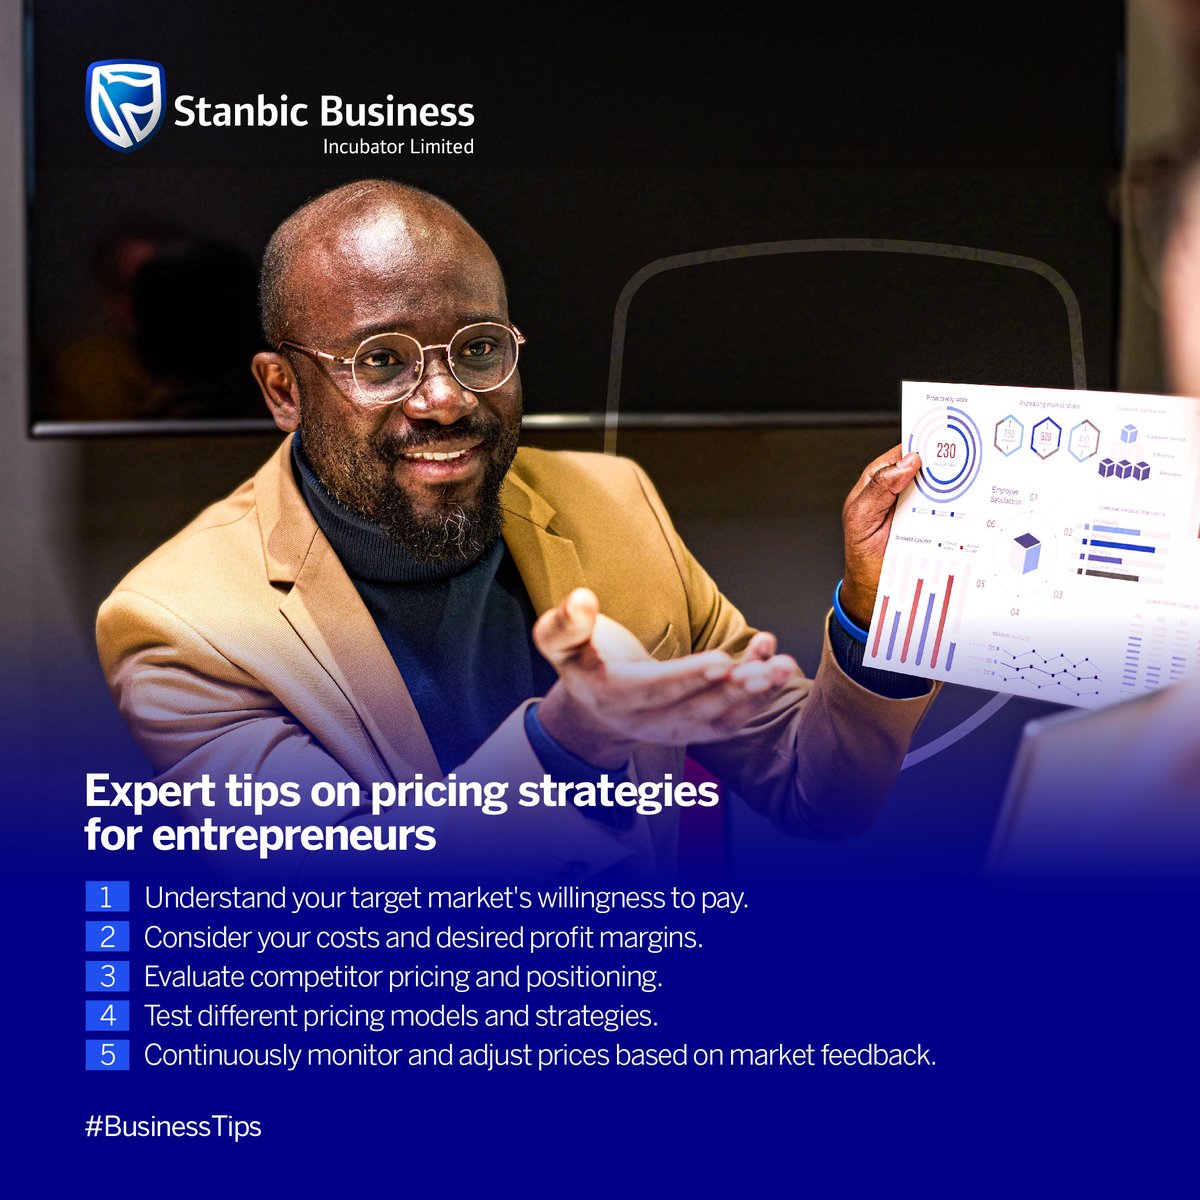 Do you know how to price your products?
Here are expert tips on pricing that you can benchmark.
#BusinessTips